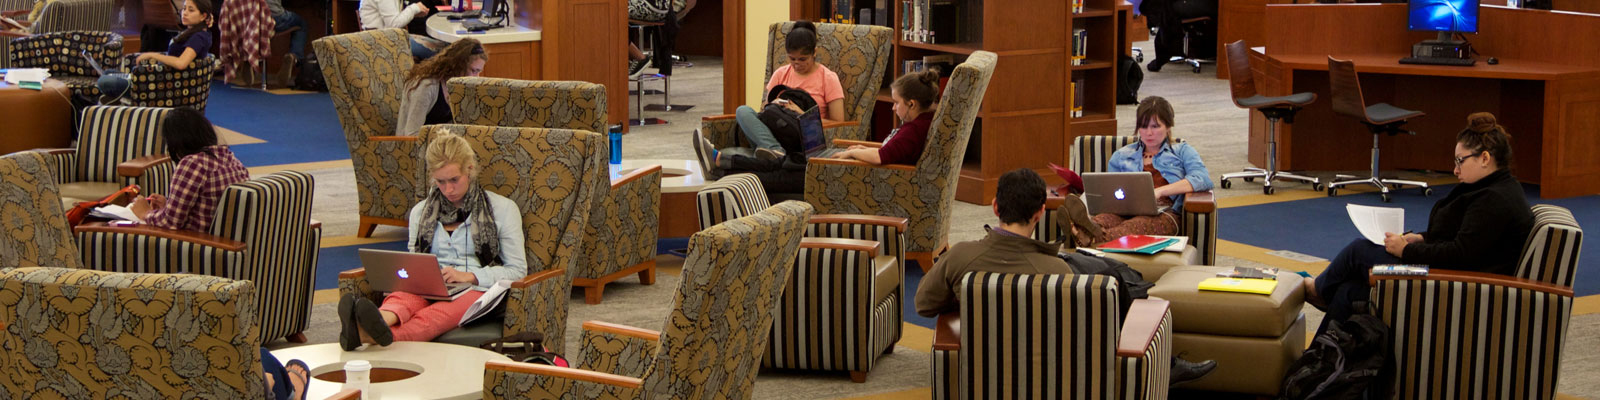 Wide shot of students working in library